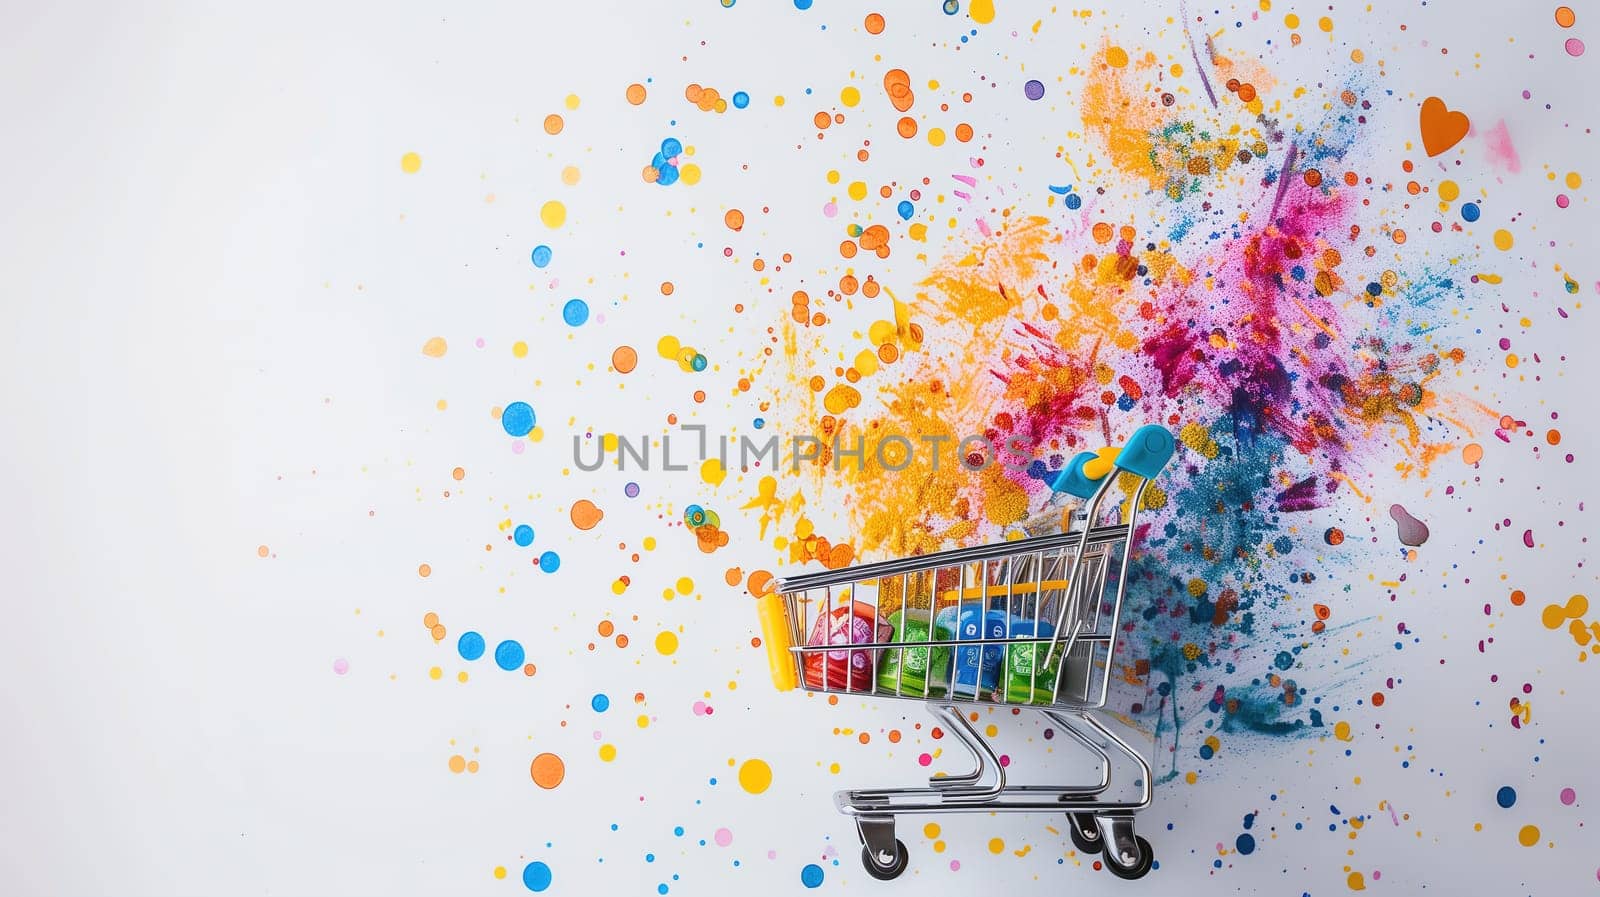 A shopping cart covered in vibrant splashes of paint. The paint splatters create a striking visual contrast against the metal surface of the cart. This image conveys a sense of creativity and individuality.